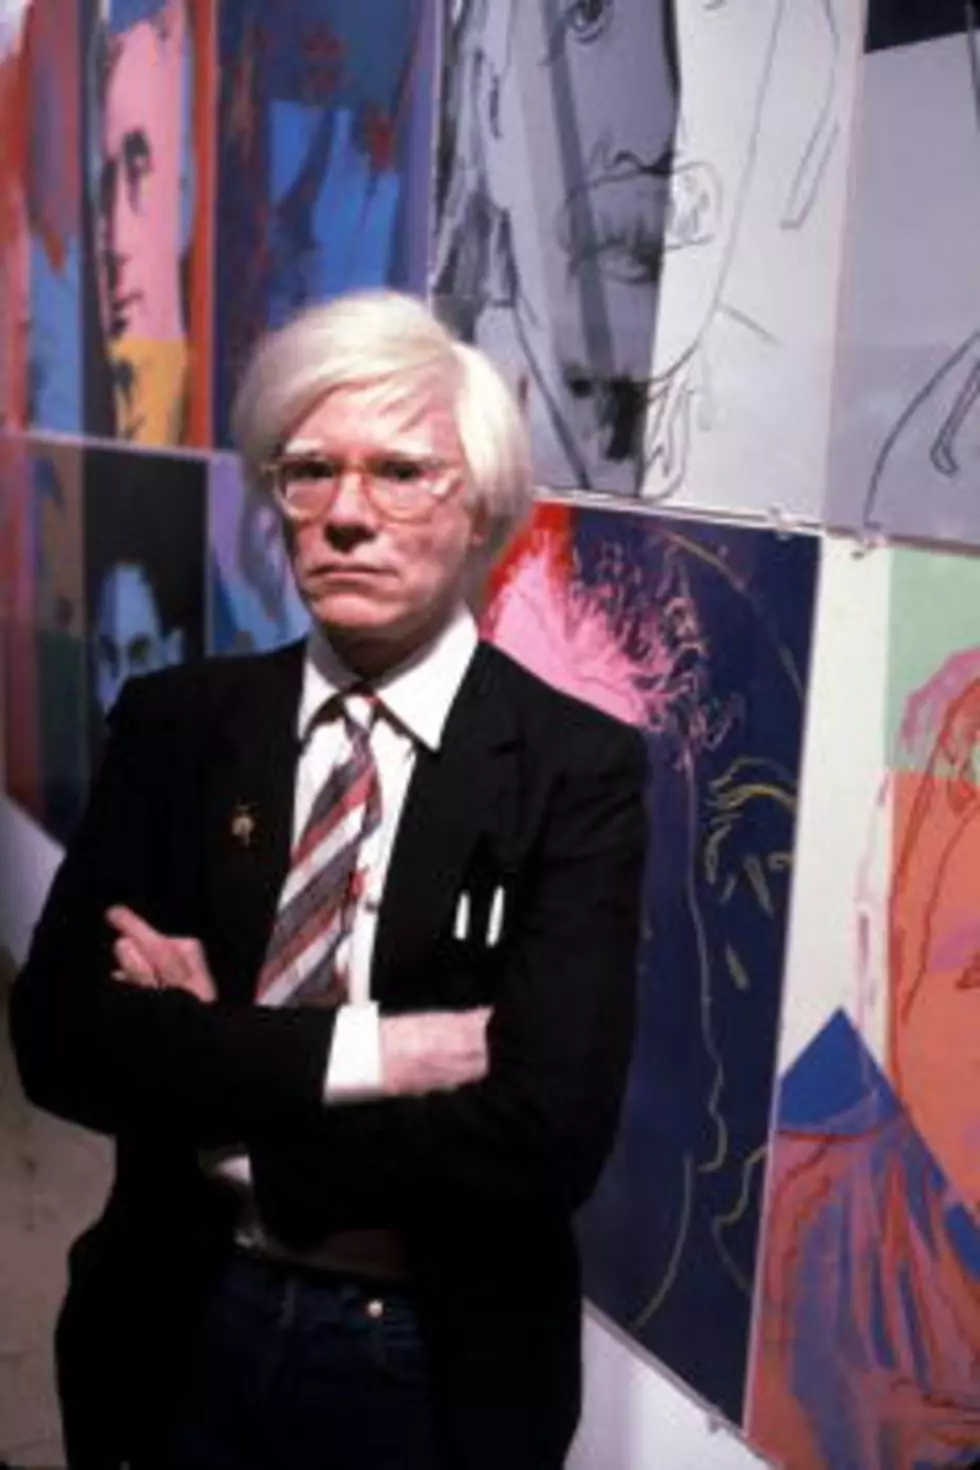 Texas Tech Museum to Present the Works of Andy Warhol